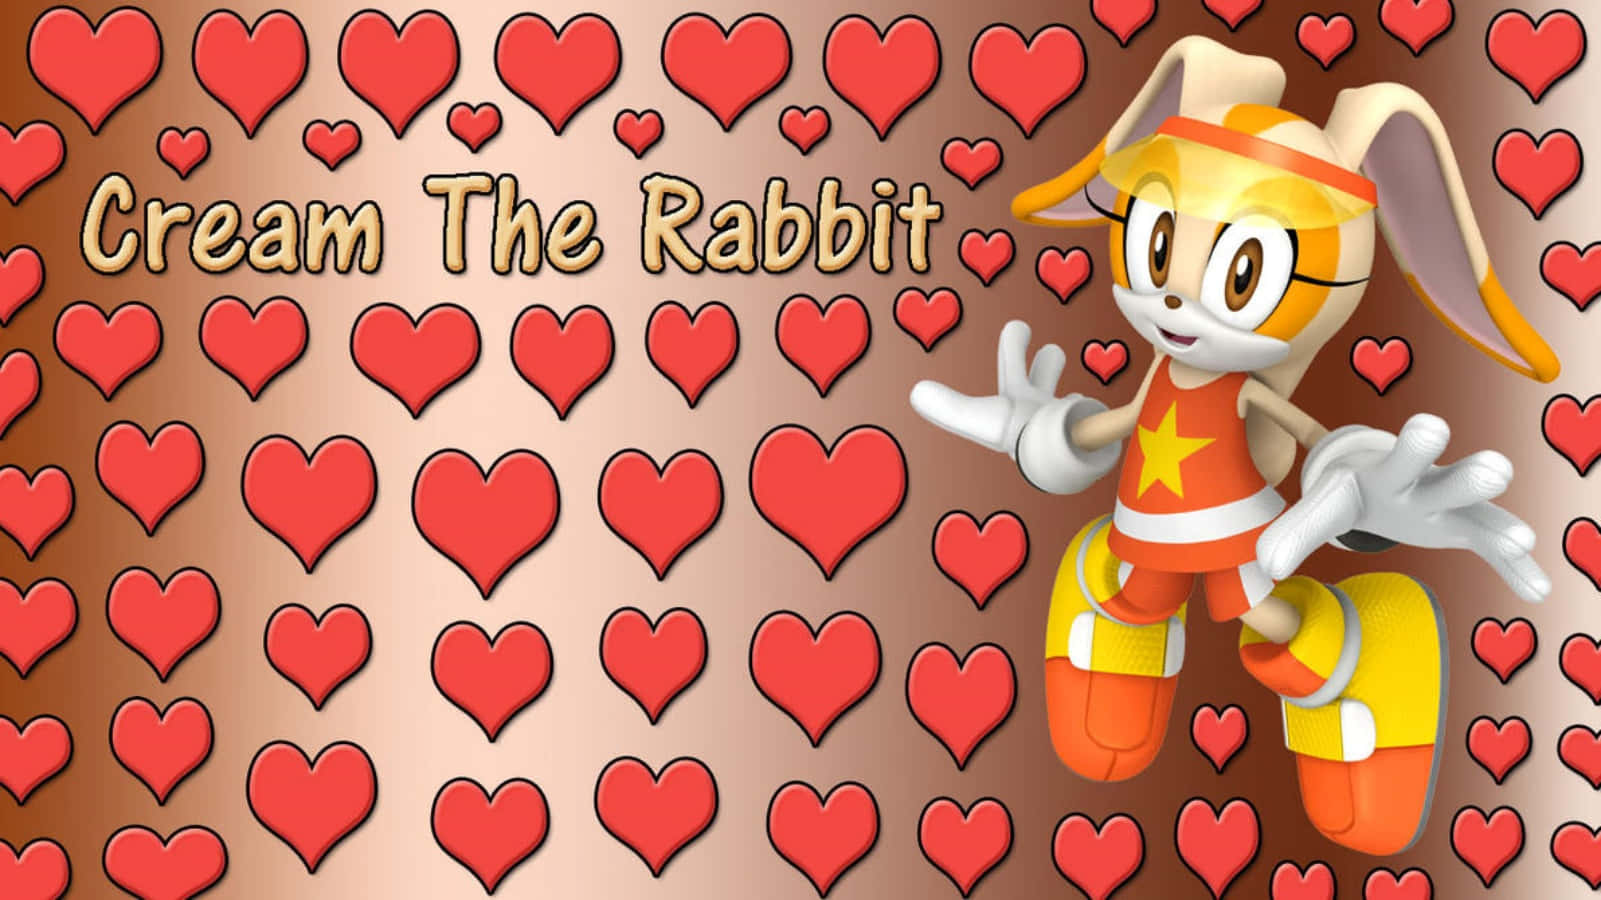 Adorable Cream The Rabbit Smiling with Cheese the Chao in a Dreamy Background Wallpaper